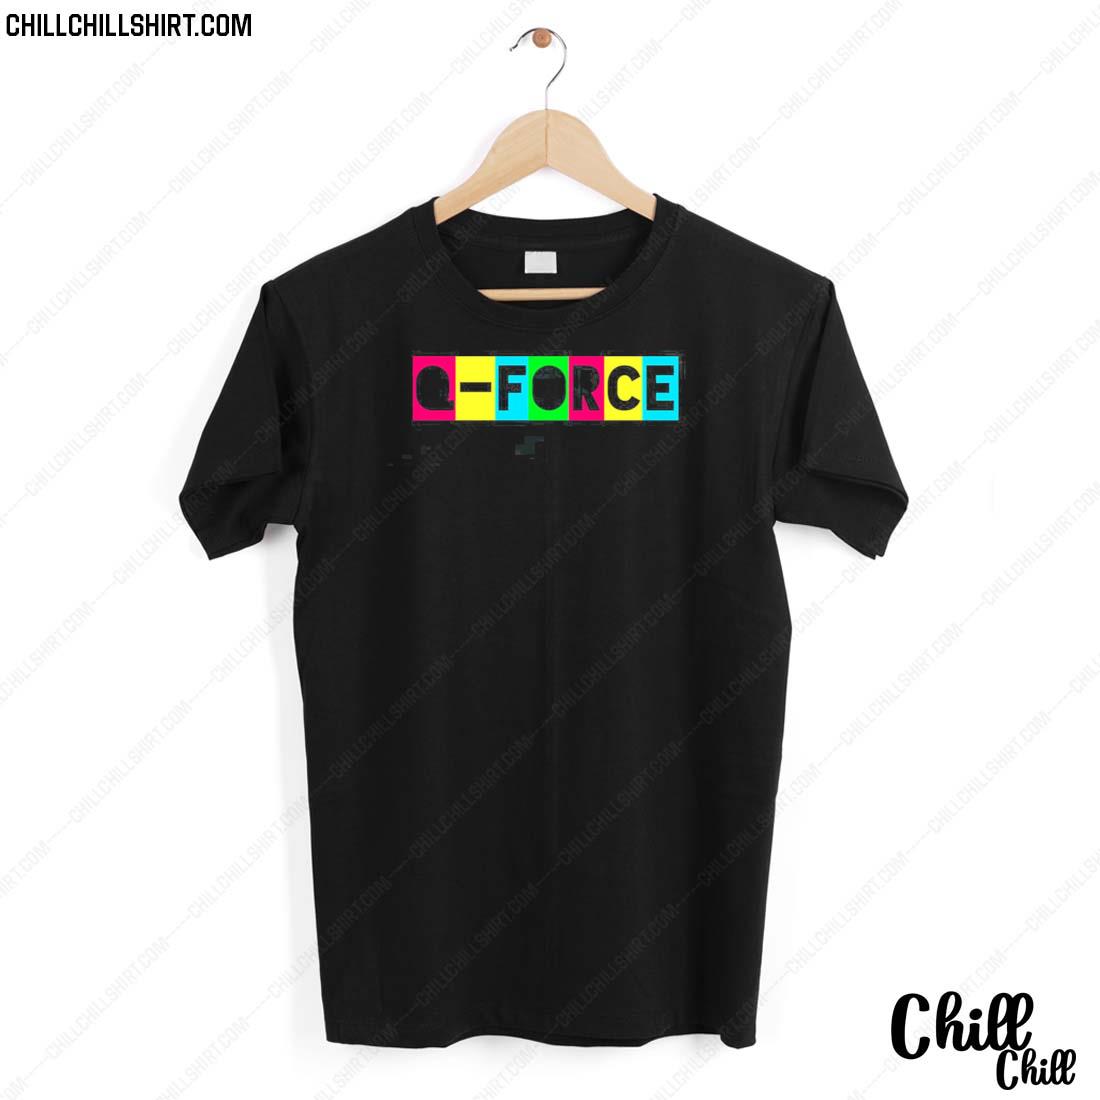 Nice colored Typography Logo Qforce T-shirt